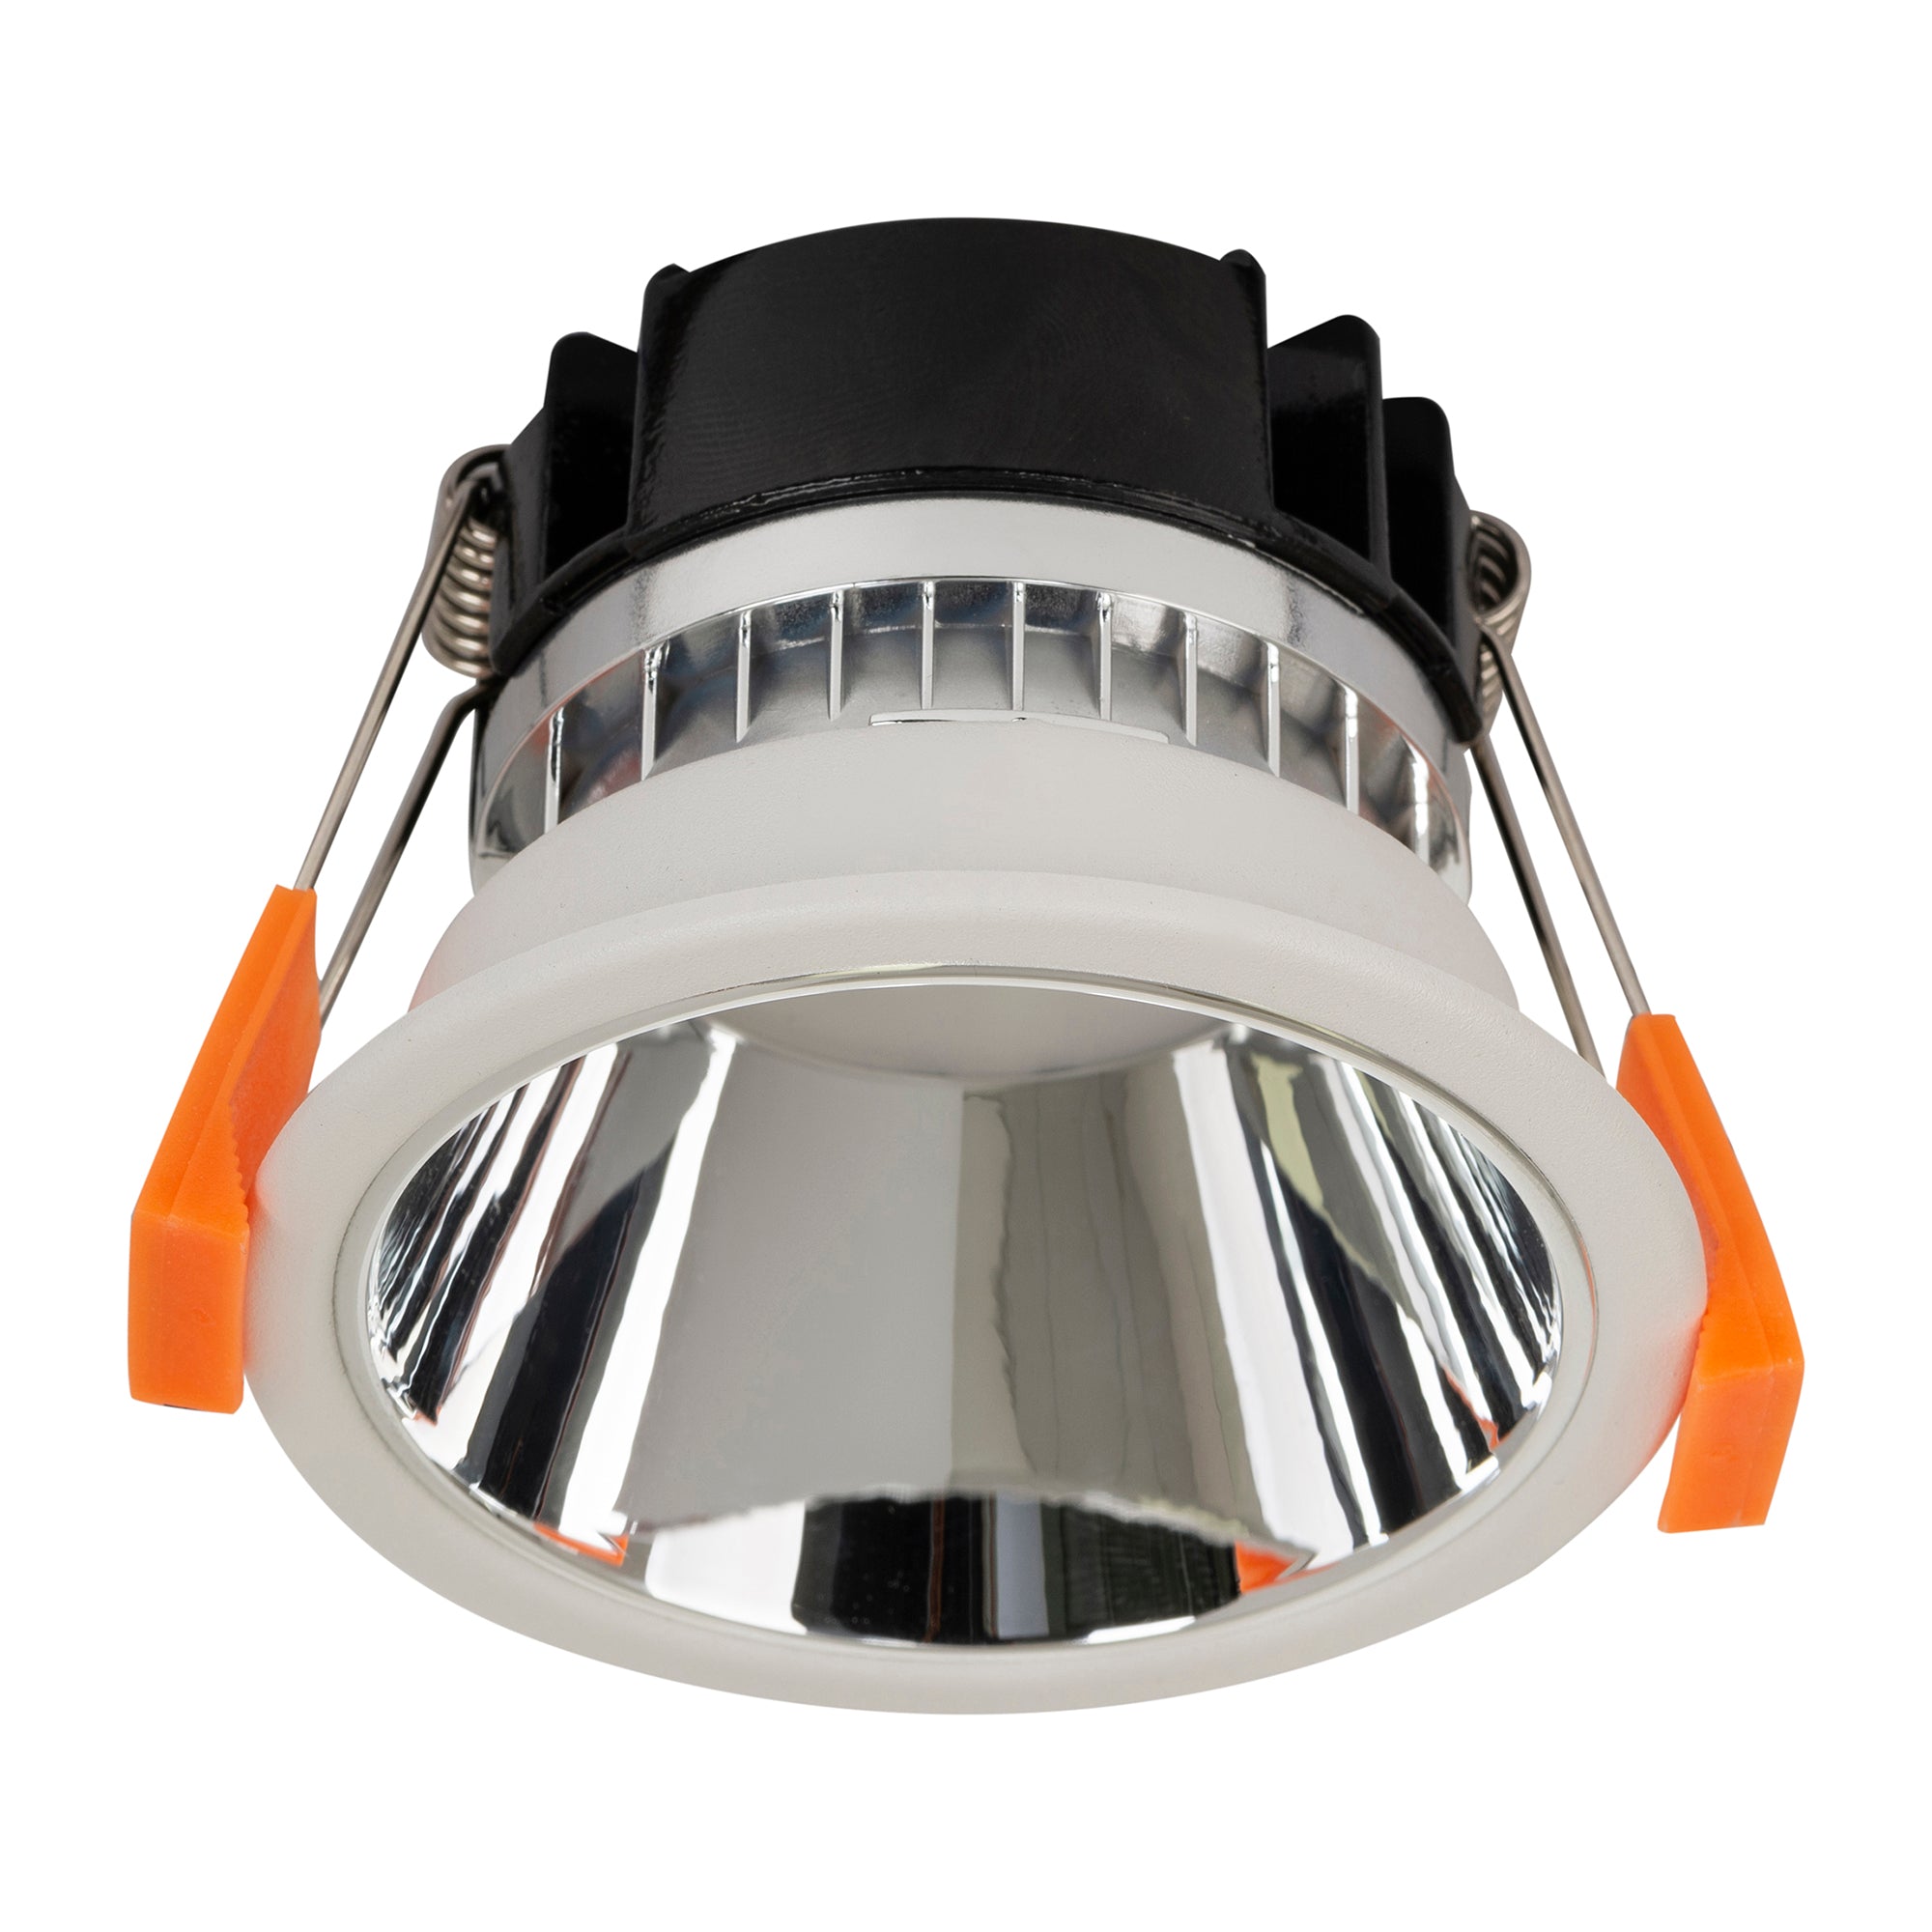 HV5529D2W-WC - Gleam White with Chrome Insert Fixed Dim to Warm LED Downlight